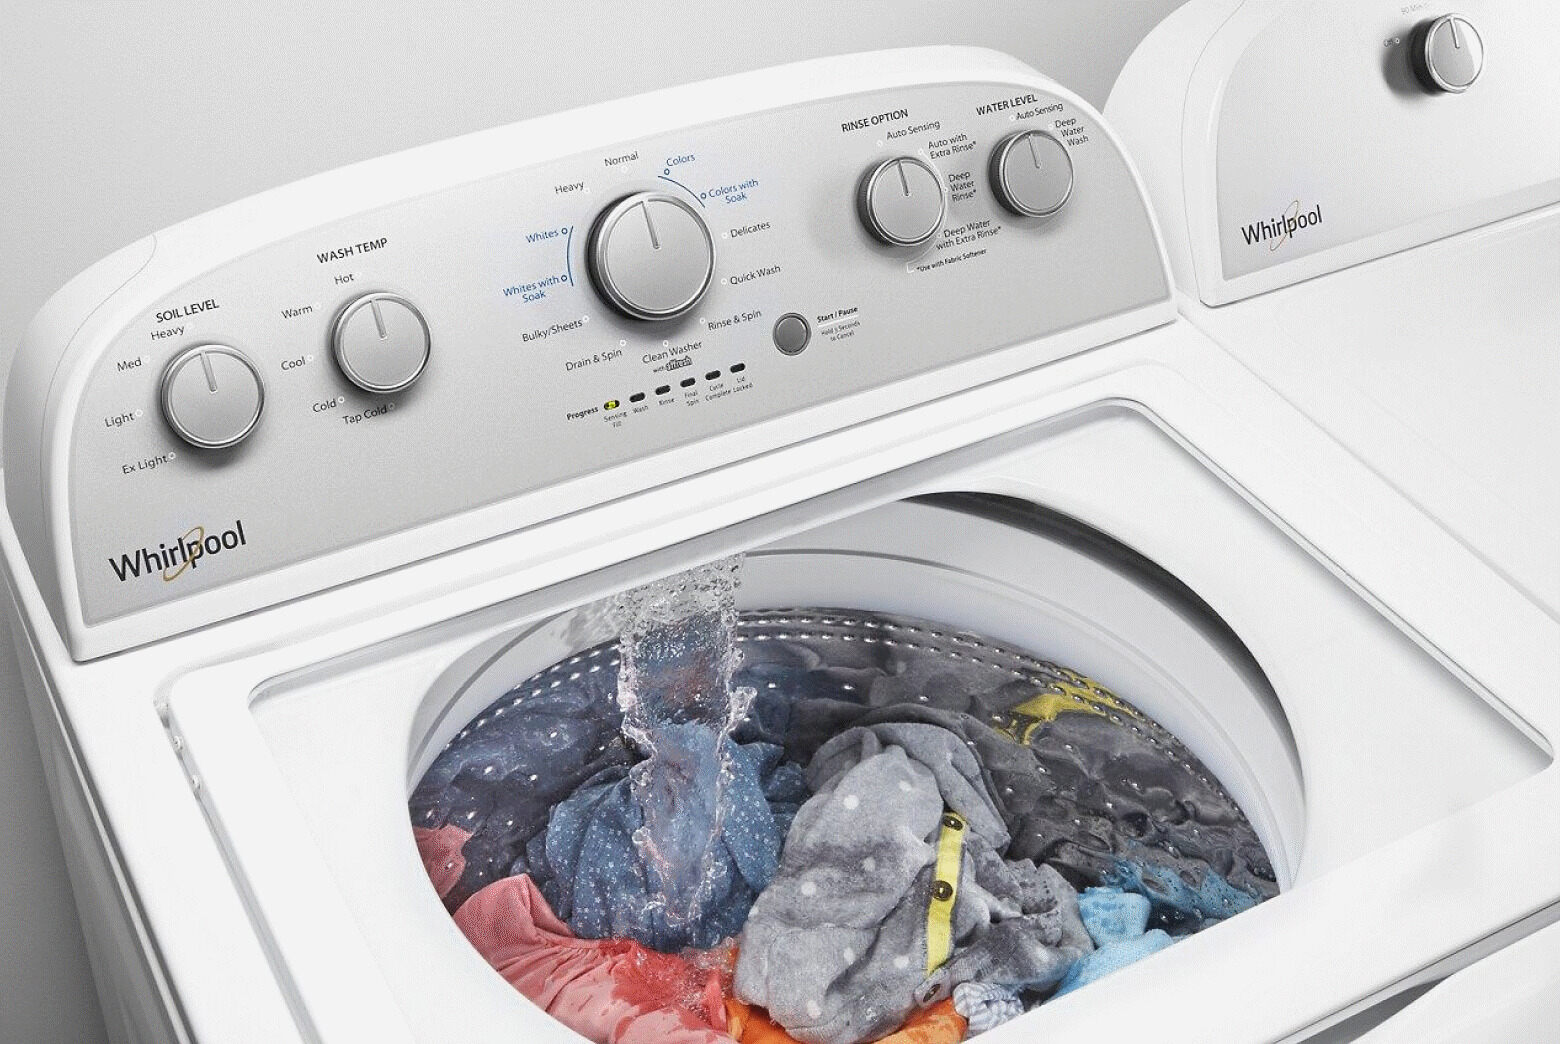 How To Fix The Error Code F43 For Whirlpool Washer